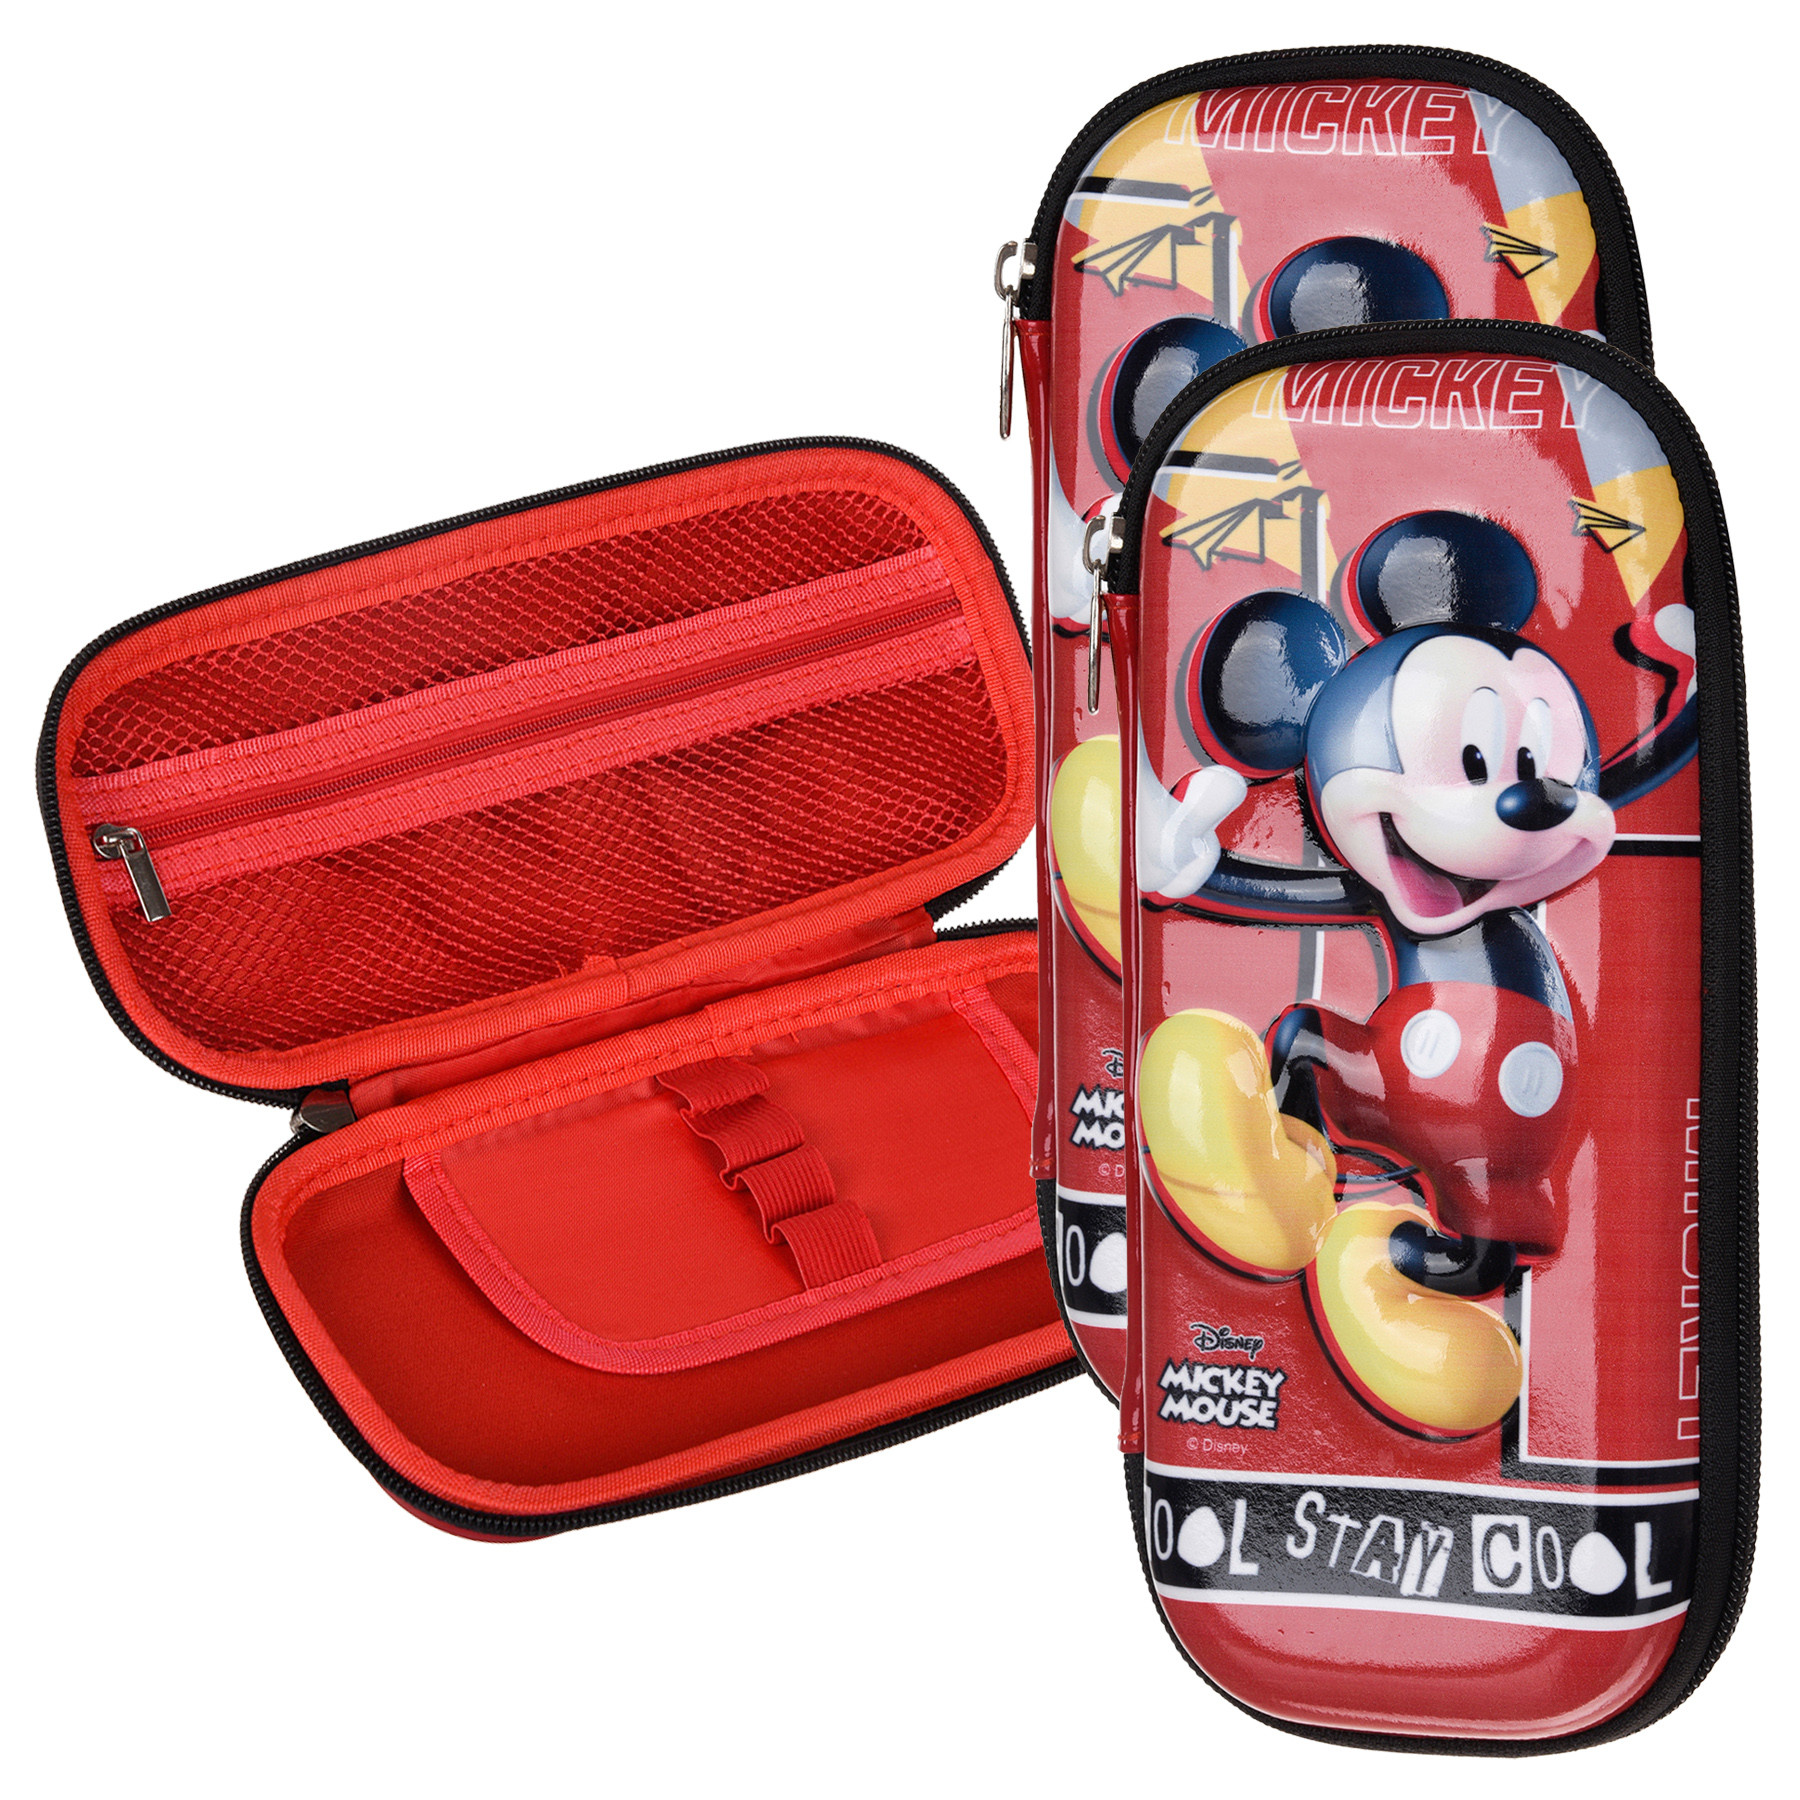 Kuber Industries Disney Mickey Pencil Pouch | School Pencil Case for Kids | Pen-Pencil Box for Kids | Geometry Box | Compass Box | School Stationery Supplies | Red